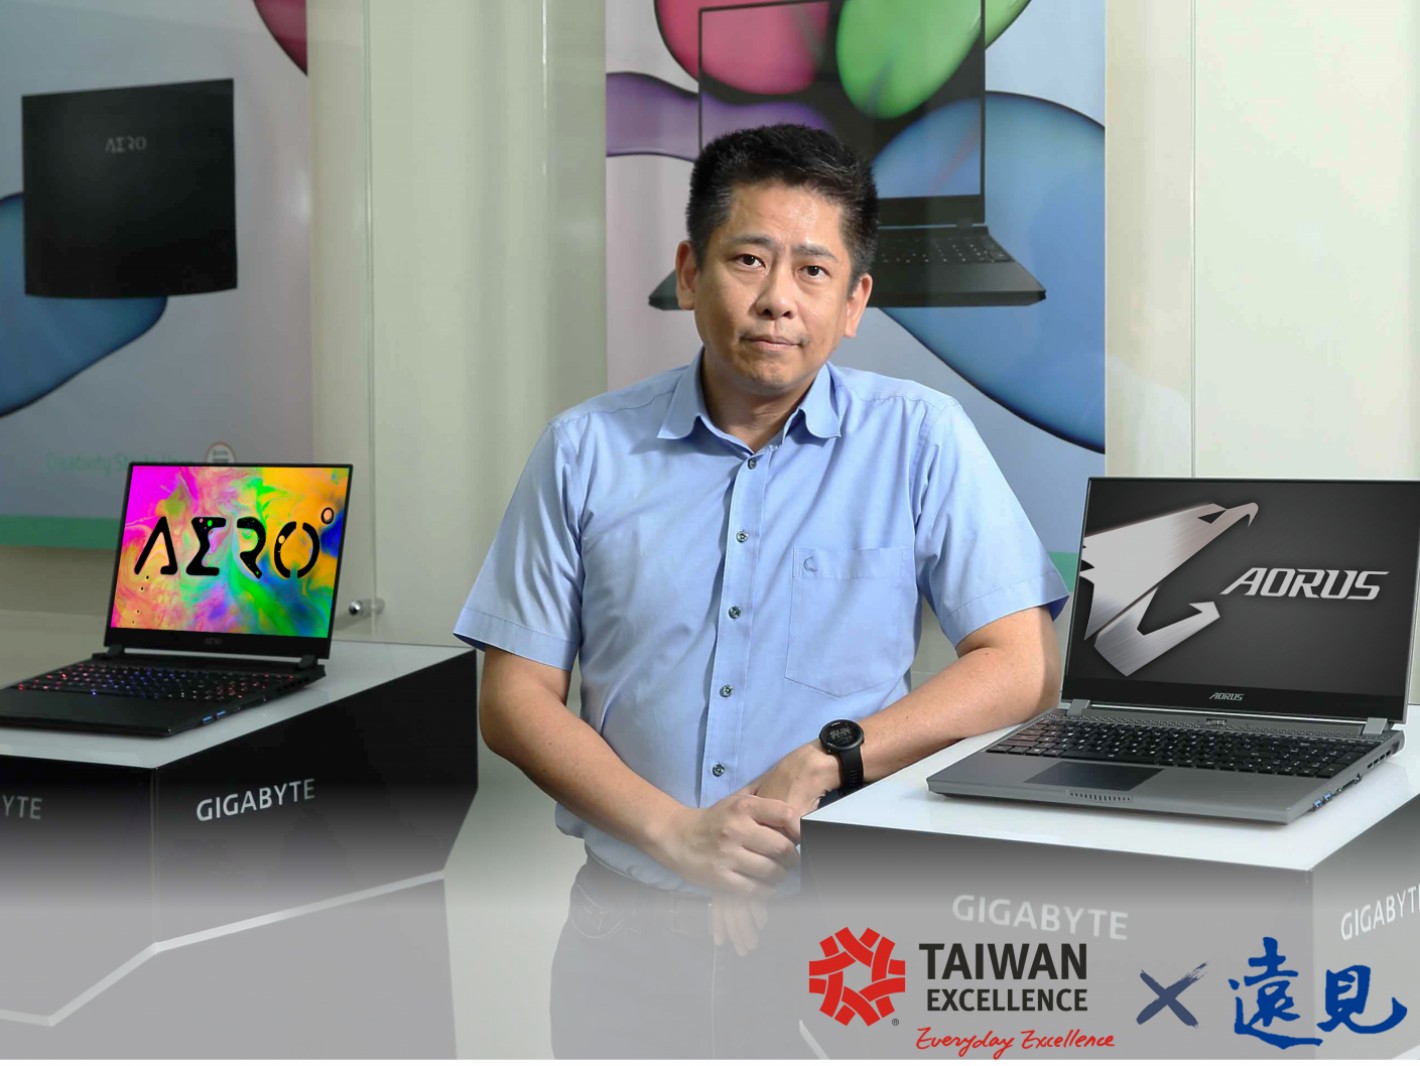 Vice president of GIGABYTE Technology’s Mobile Devices Center, Steve Chen, emphasized the marketing and promotion of the self-owned brand in recent years.